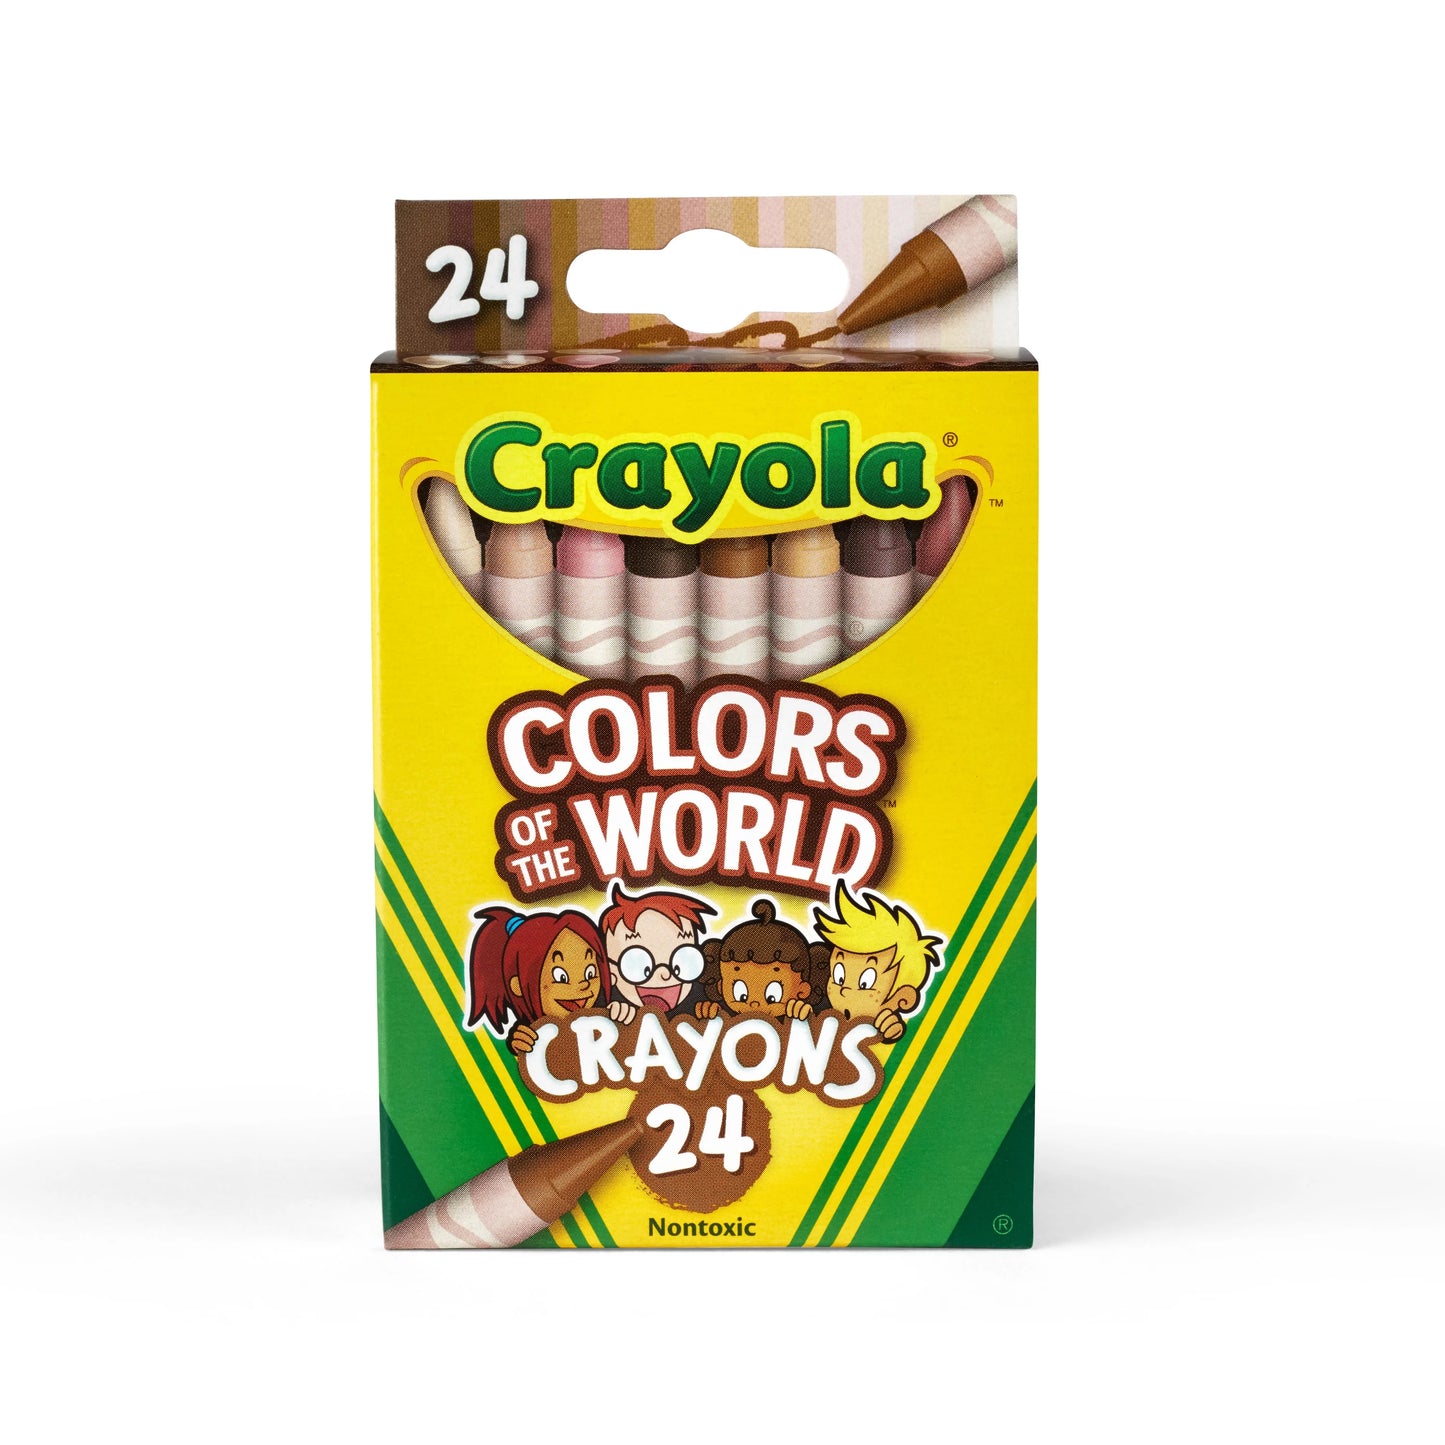 Crayola Crayons - Colors of the World (24 count)